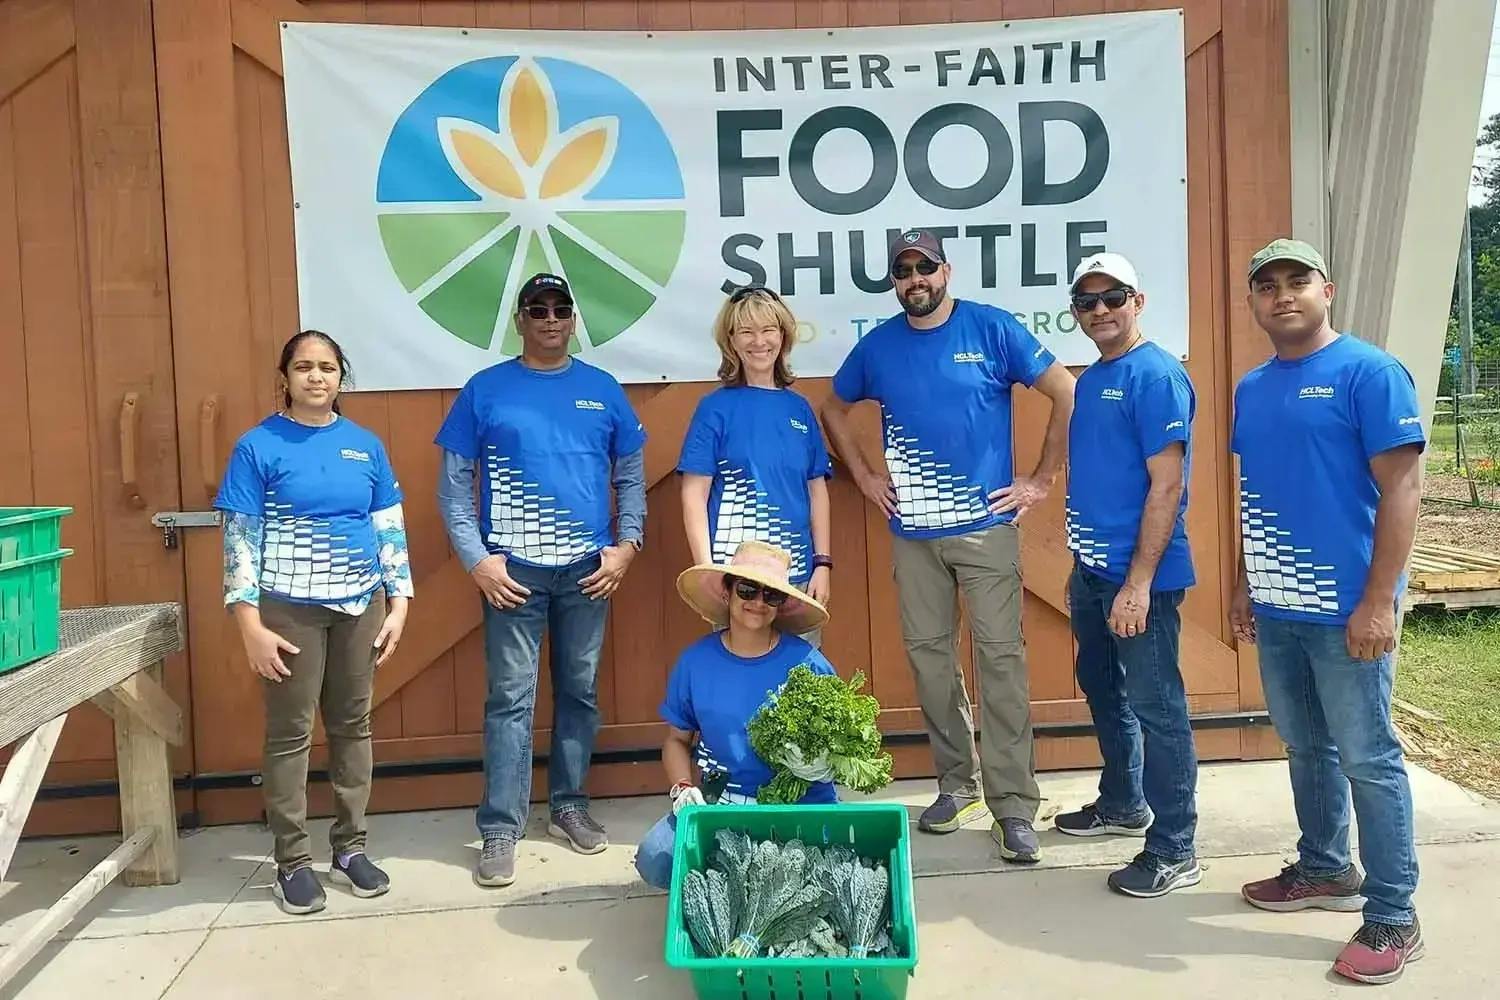 Giving back to the community with Inter-Faith Food Shuttle in Cary